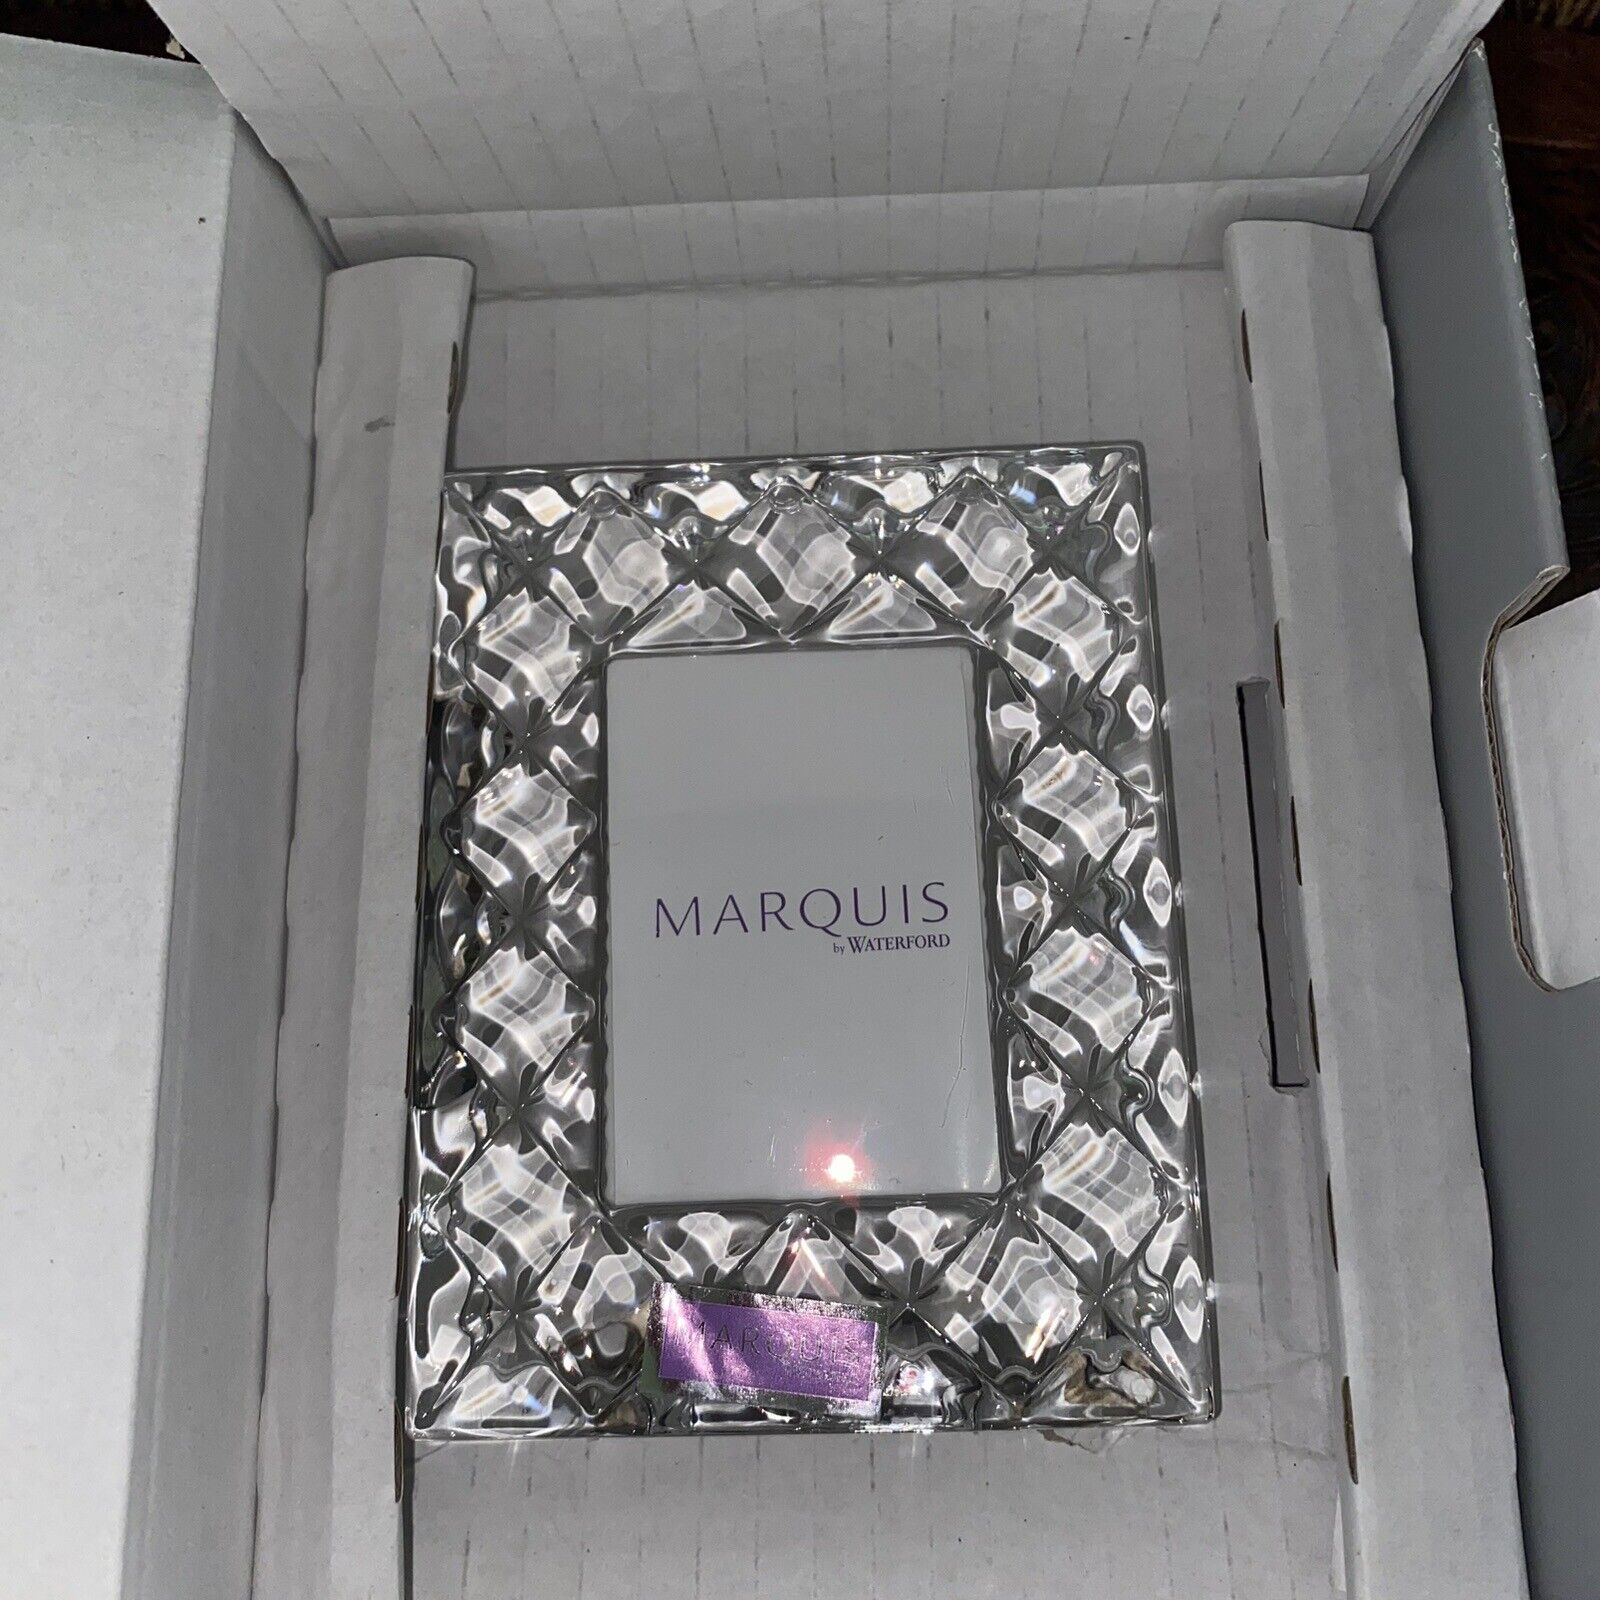 NEW Marquis by Waterford Diamond Photo Frame  5 x 7.5 cm  2 x 3 in Wedding Gift